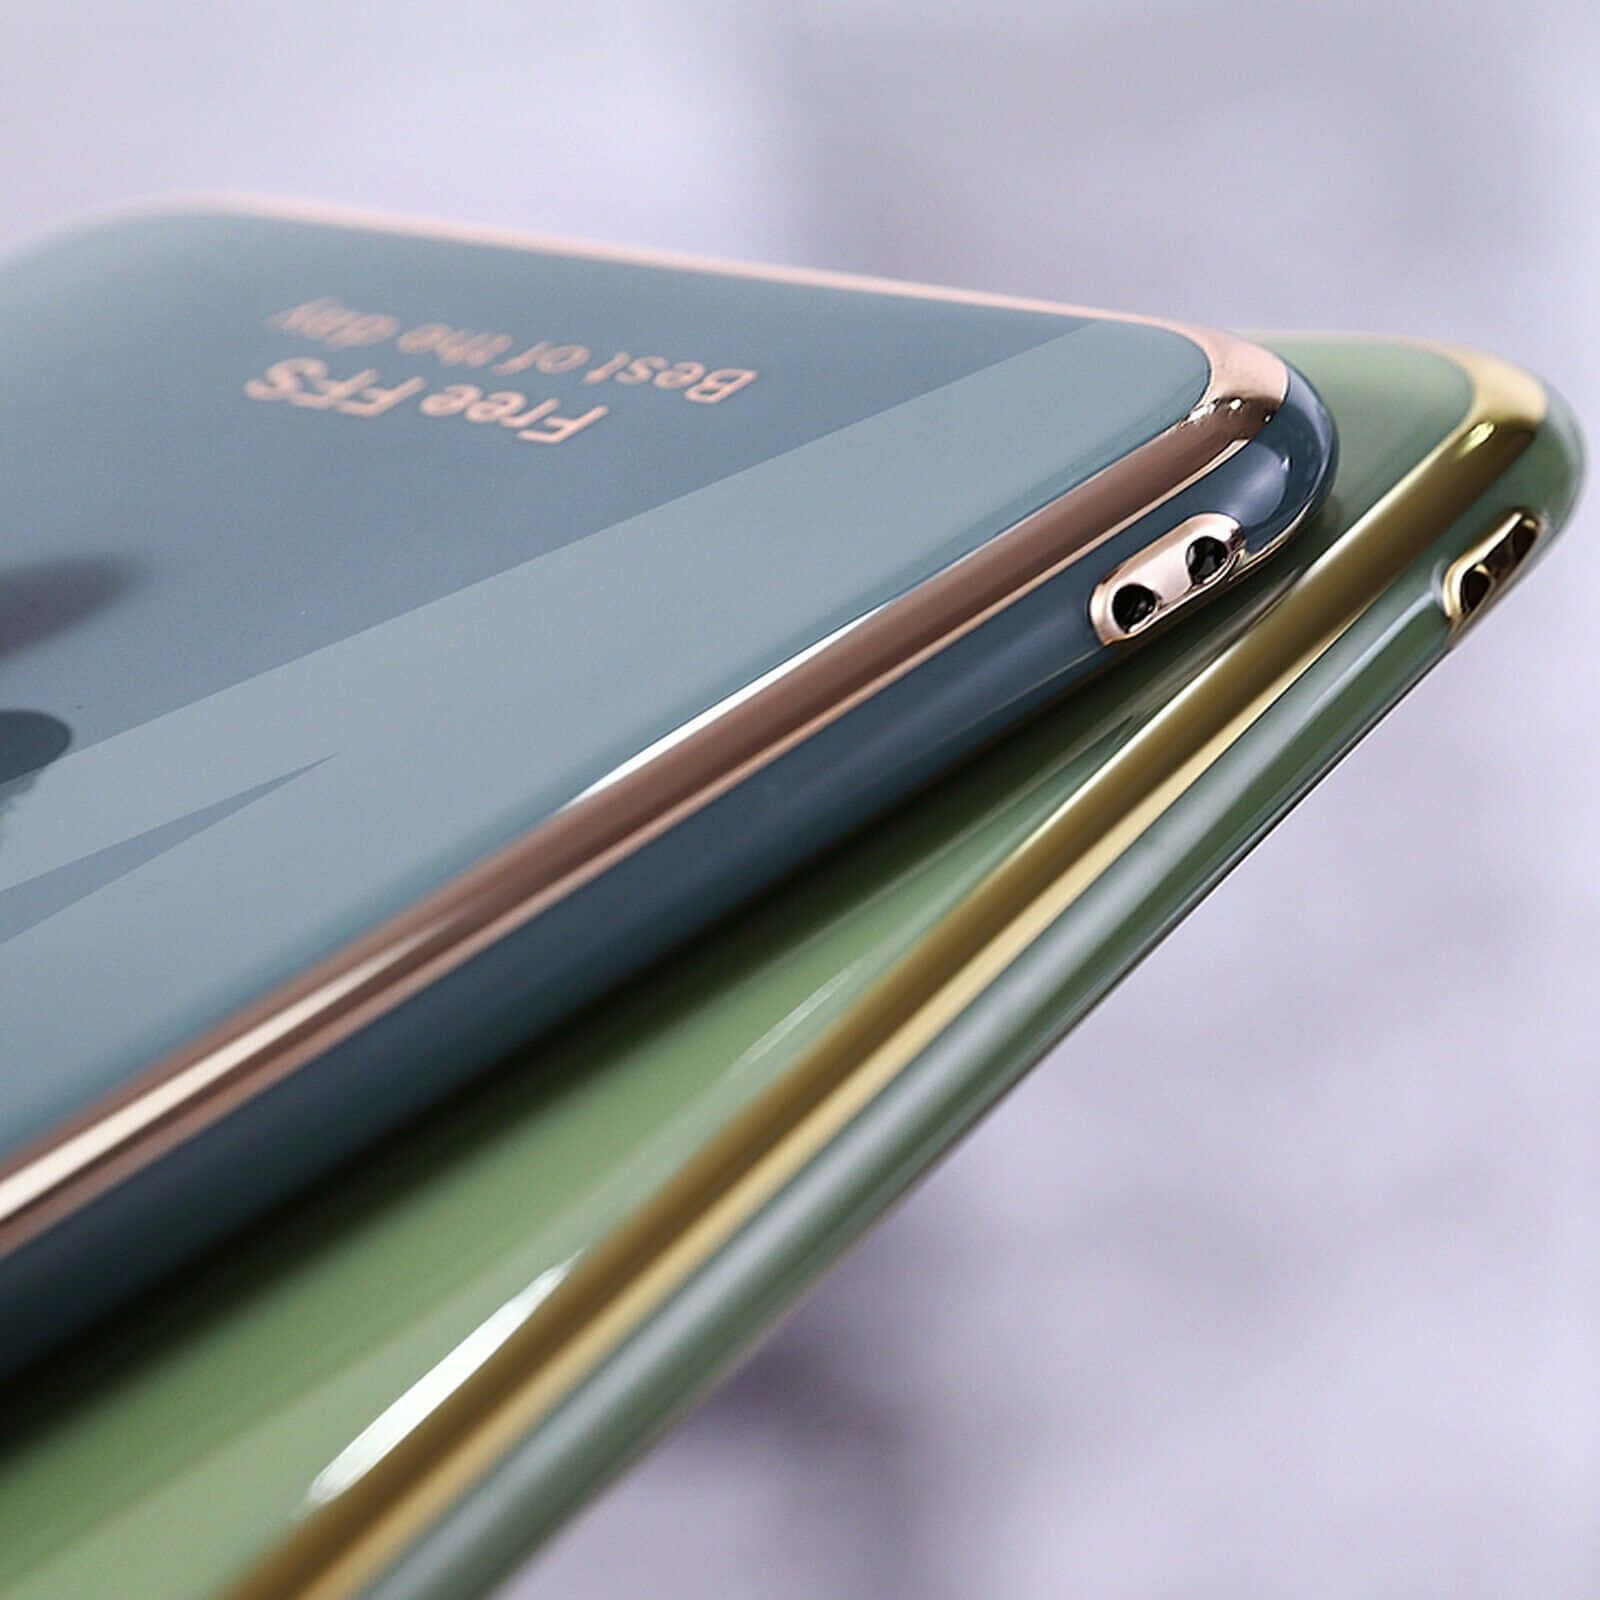 A Close Up Of An Iphone With A Gold And Green Cover